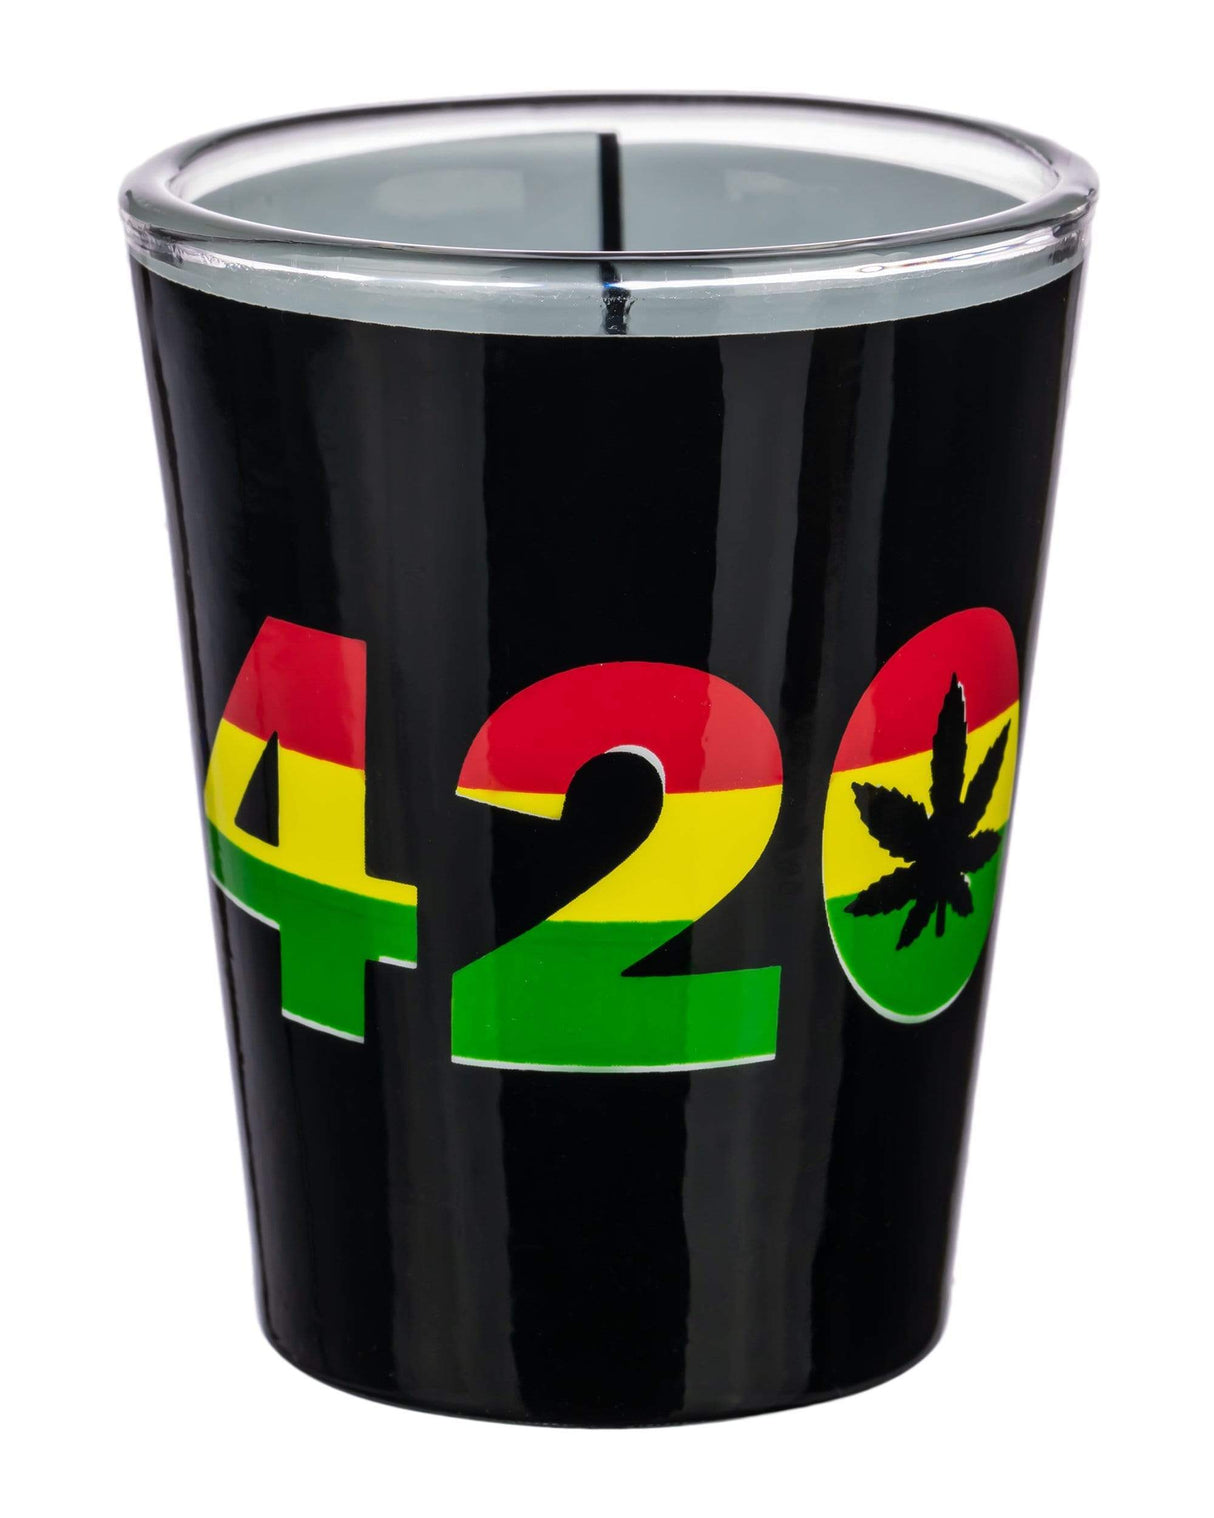 Roast & Toast 420 Ceramic Shot Glass in Black with Rasta-Colored Numbers and Leaf Design